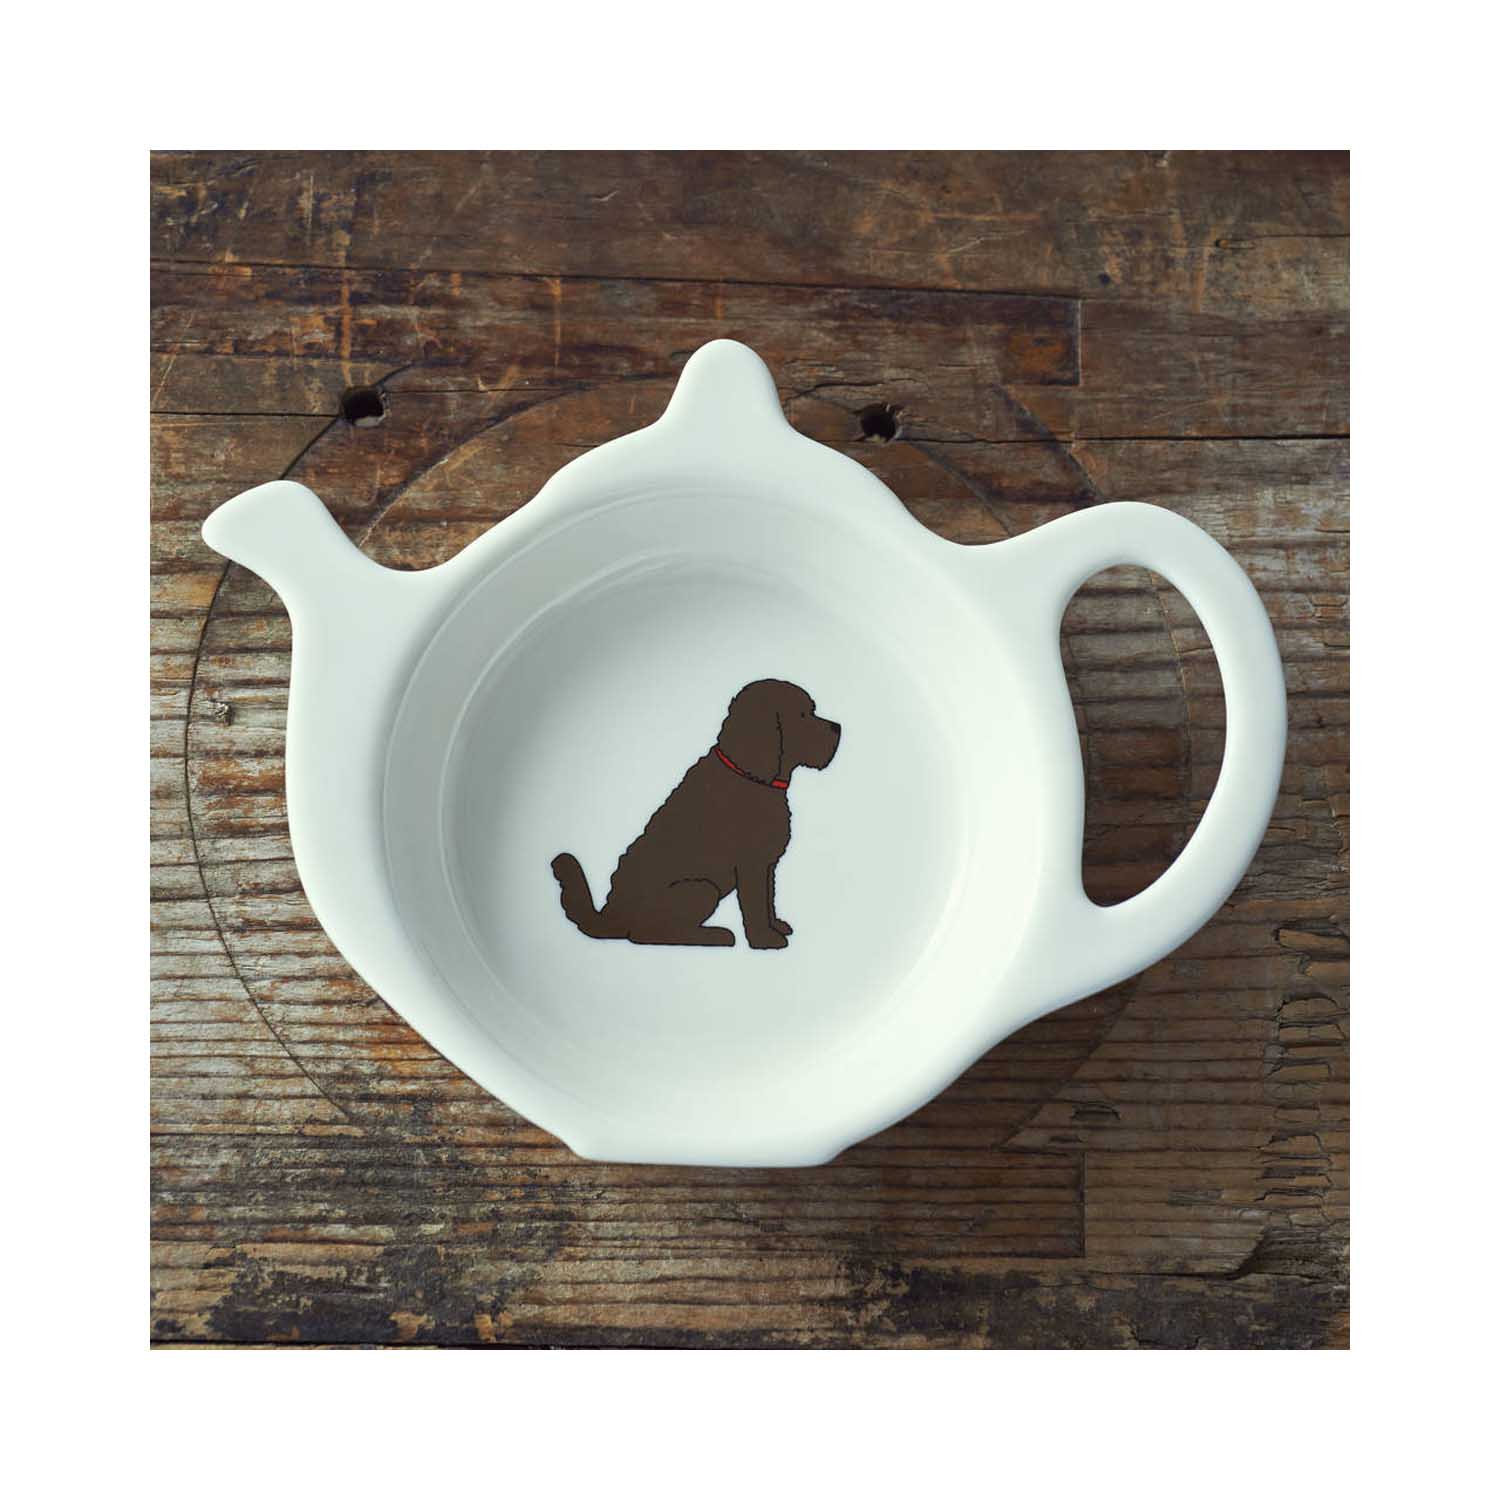 Dog Lover Gifts available at Dog Krazy Gifts - Herbie the Cockapoo Teabag Dish - part of the Sweet William range available from www.DogKrazyGifts.co.uk